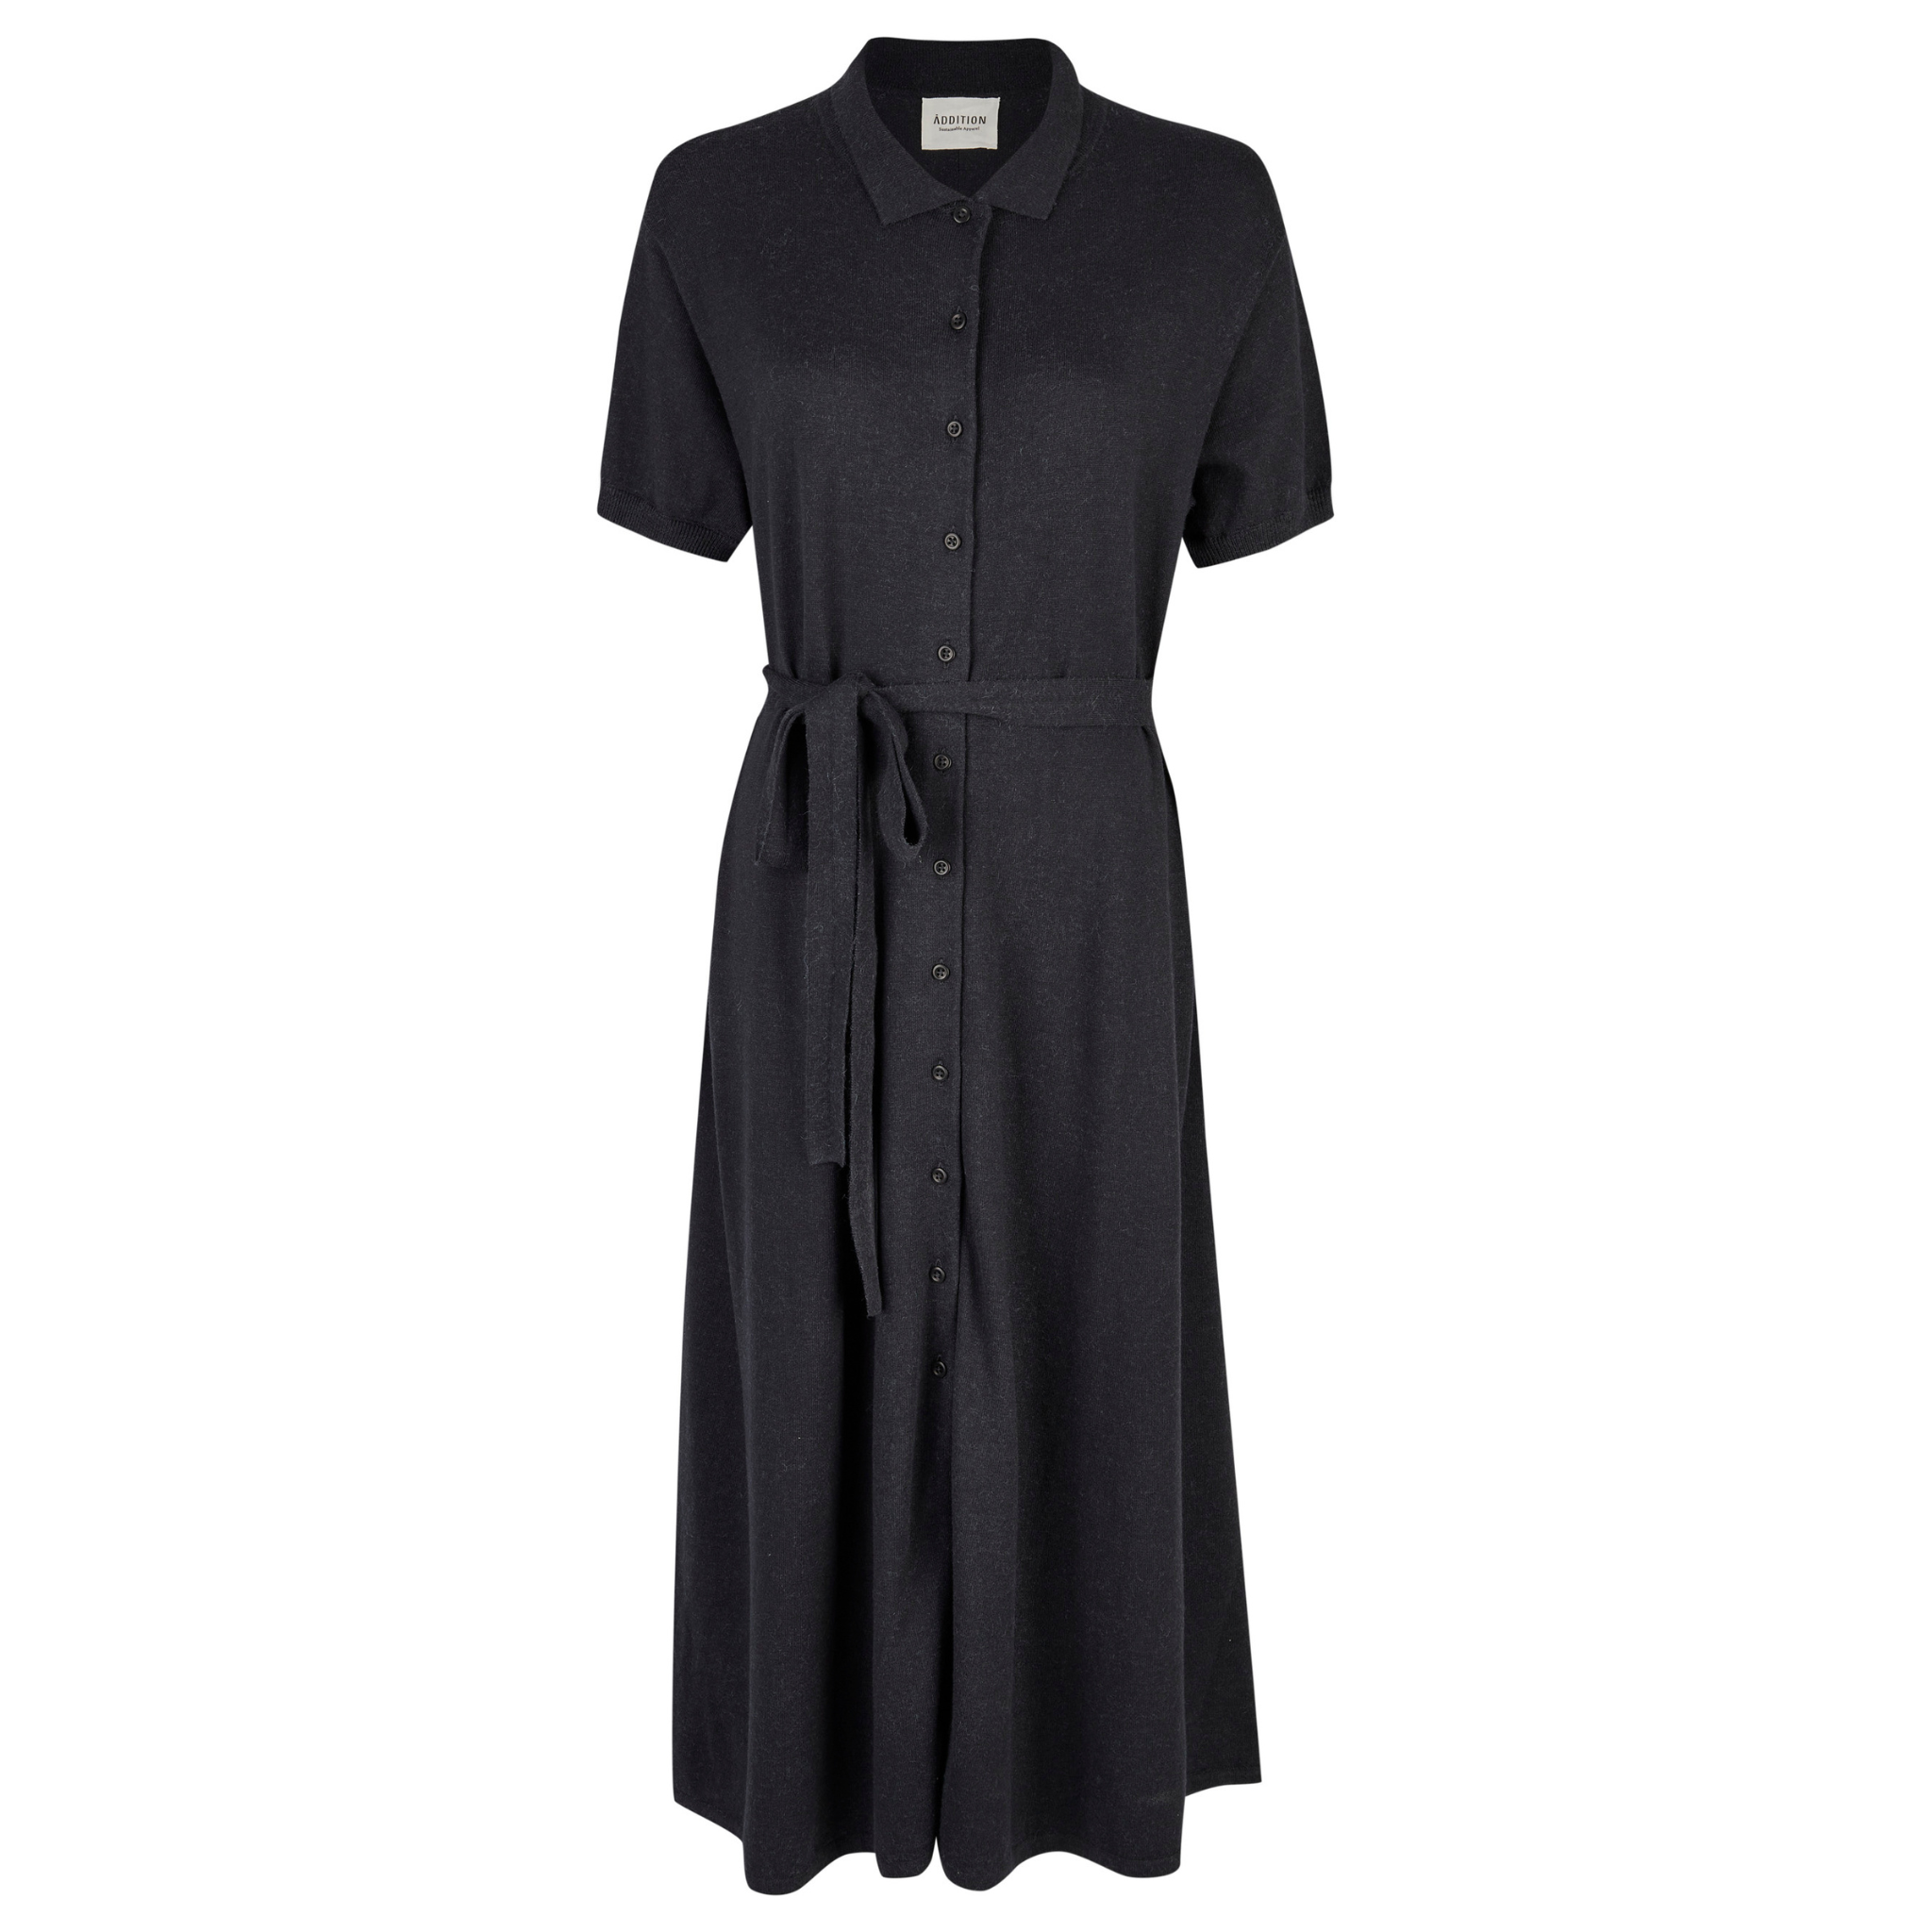 ADDITION Kleid "Relaxed Shirtdress"